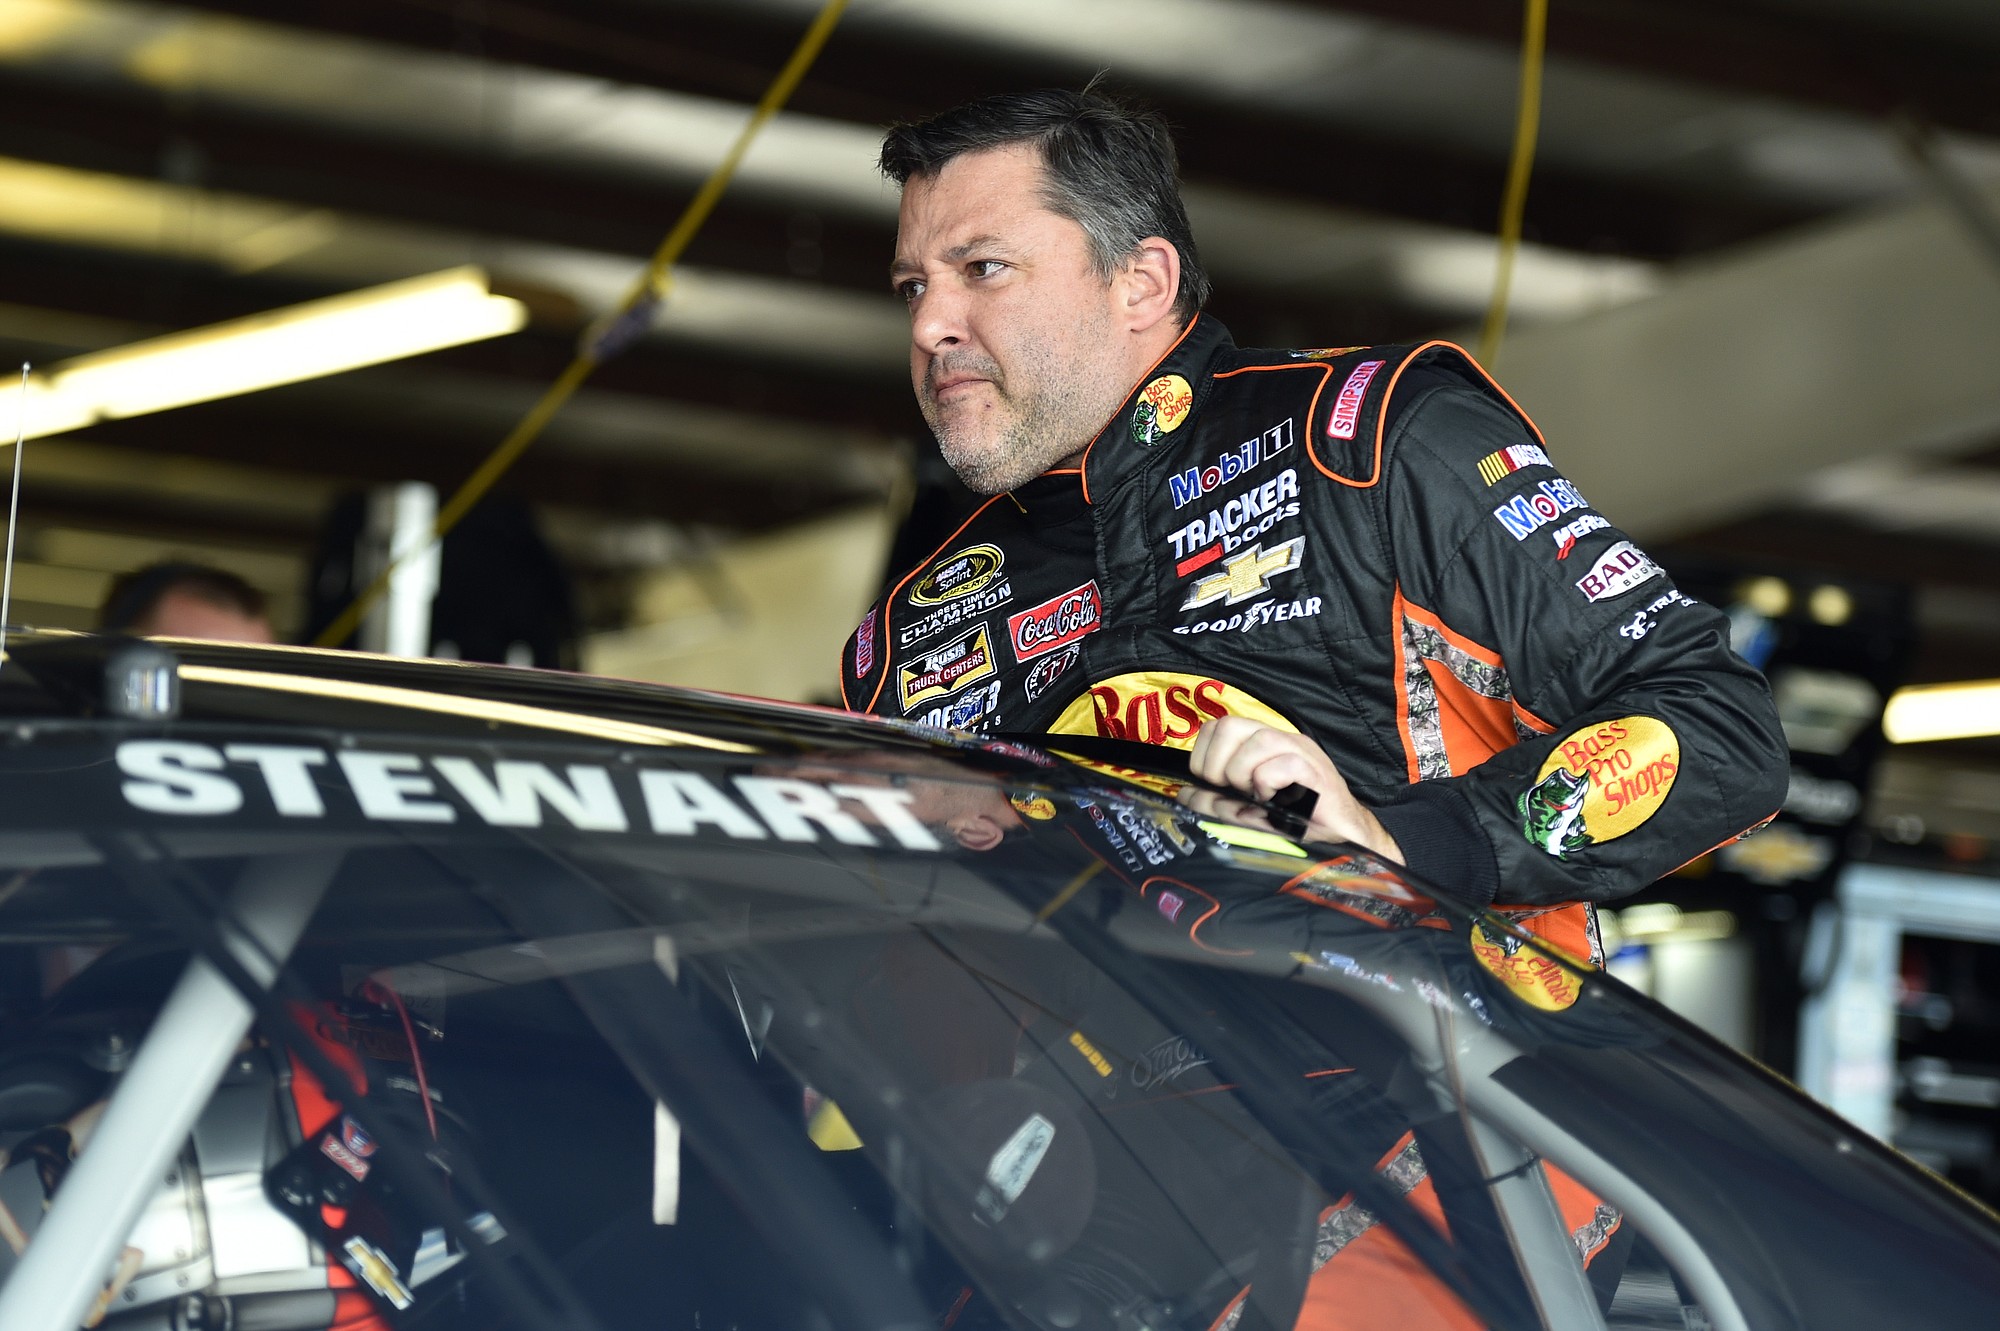 Tony Stewart climbs into his car before practice for Sunday's NASCAR Sprint Cup race at Watkins Glen International, Friday, Aug.